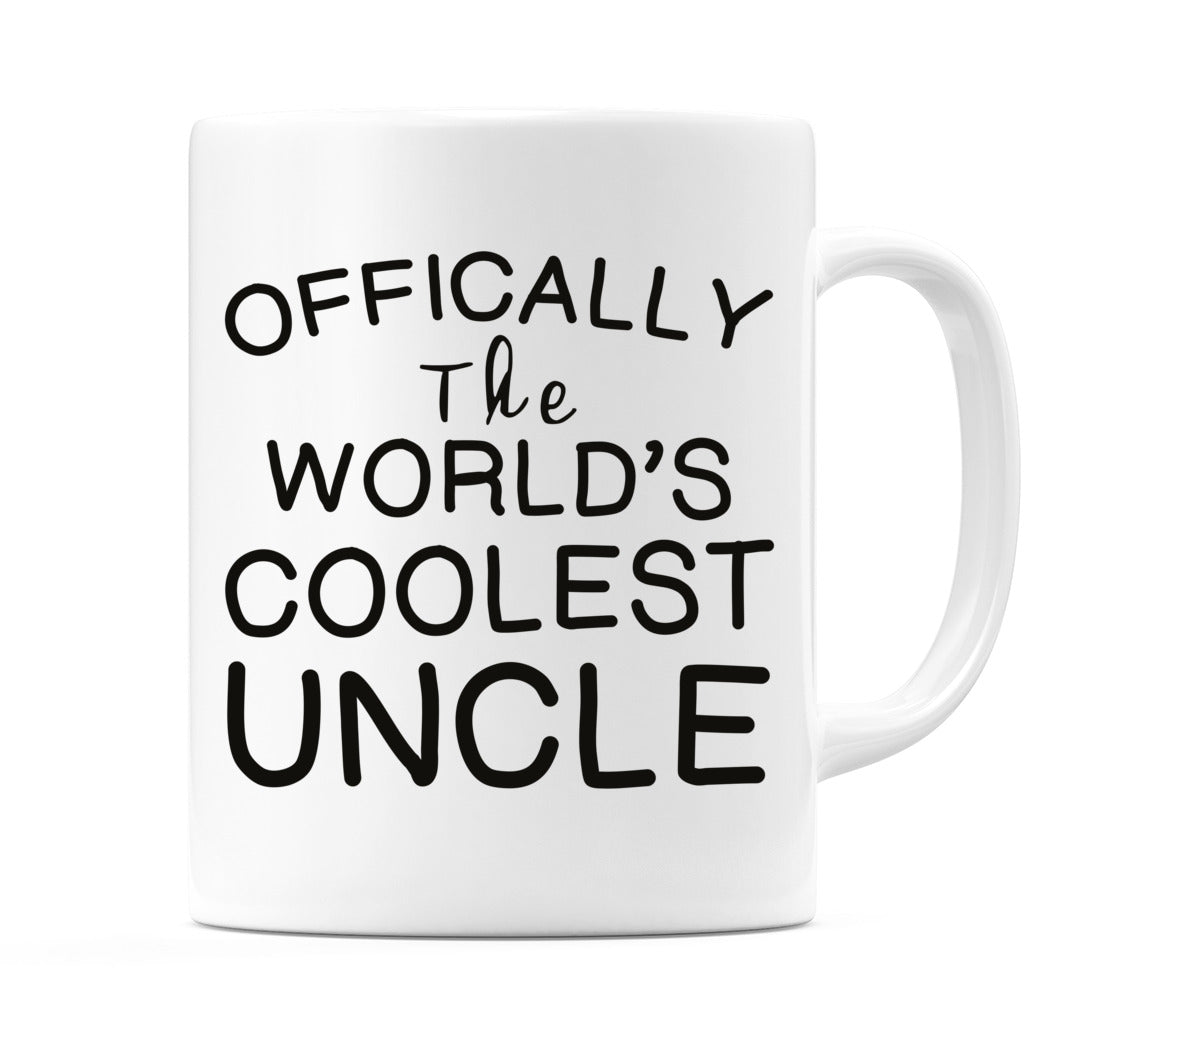 Officially the World's Coolest Uncle Mug